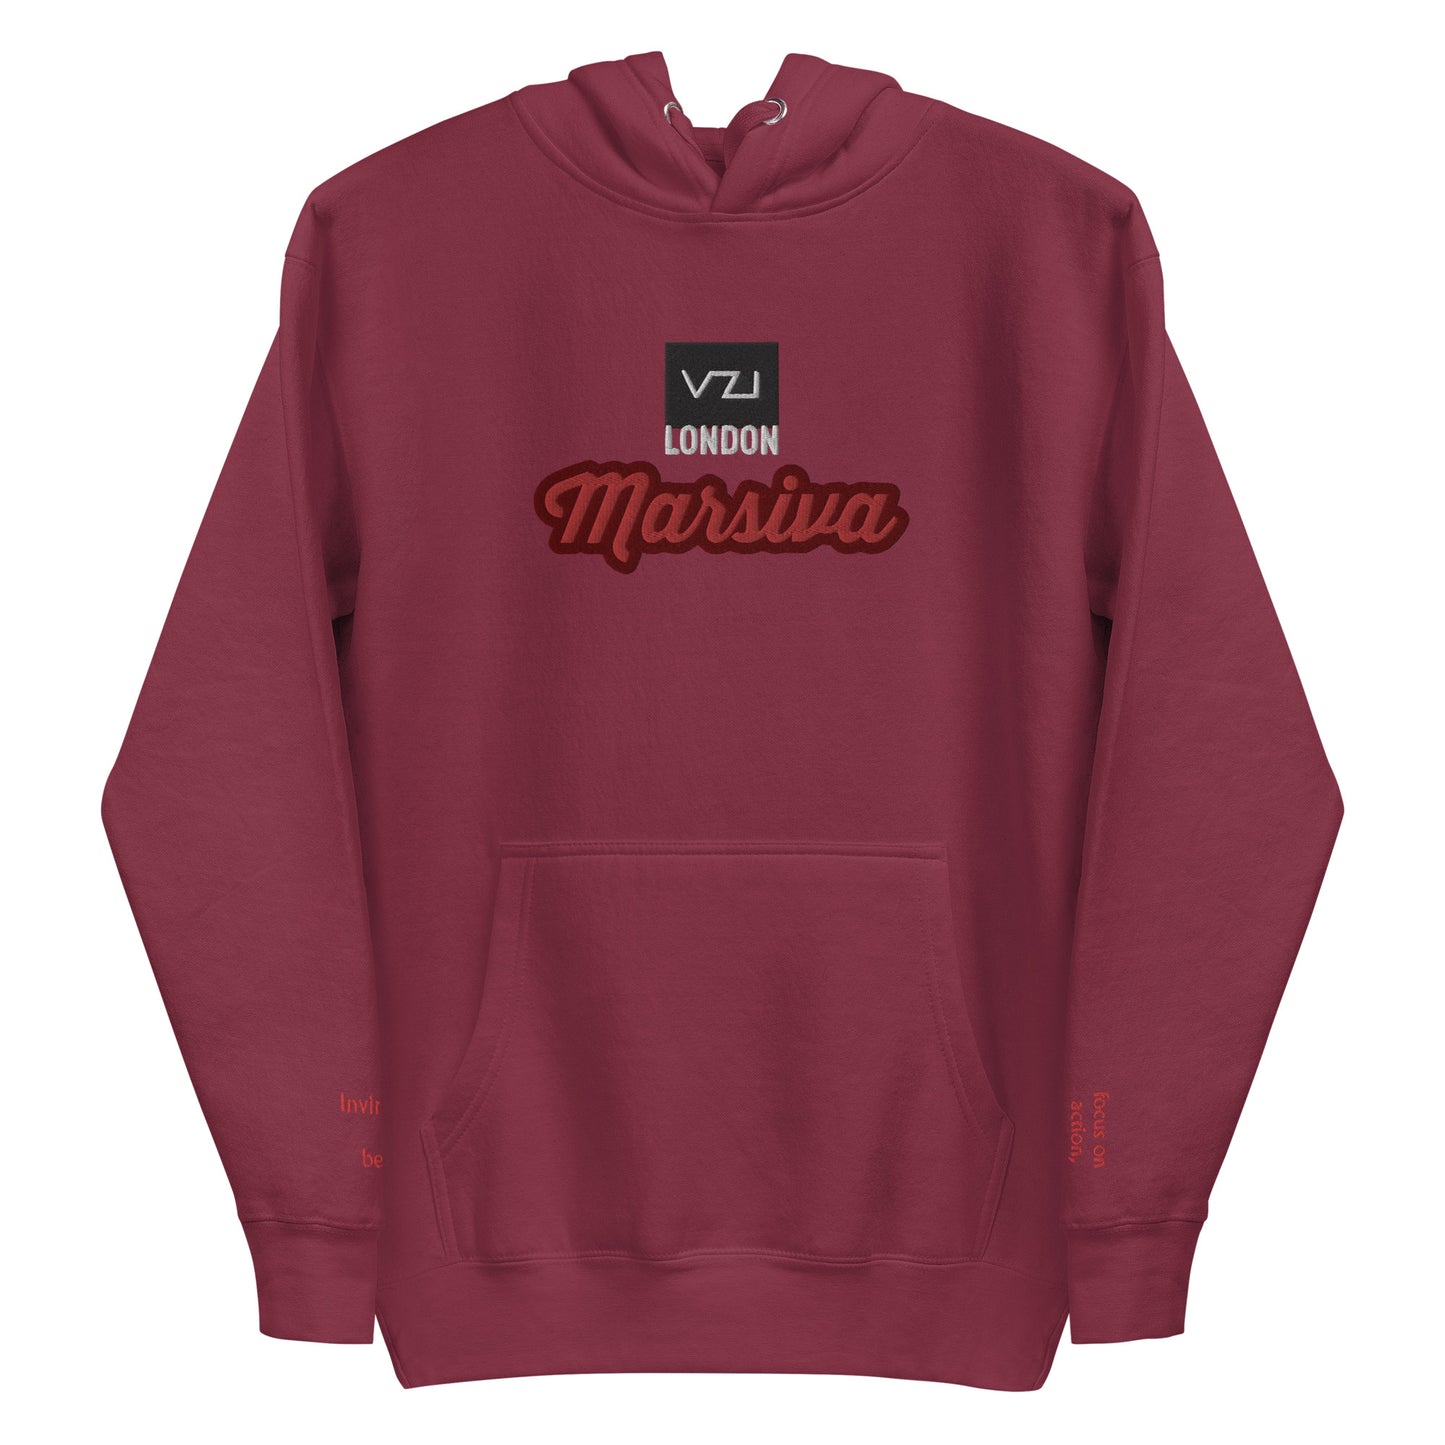 MAROON VZI Marsiva Unisex Hoodie - Classic Cotton for Action, Strength, and Power